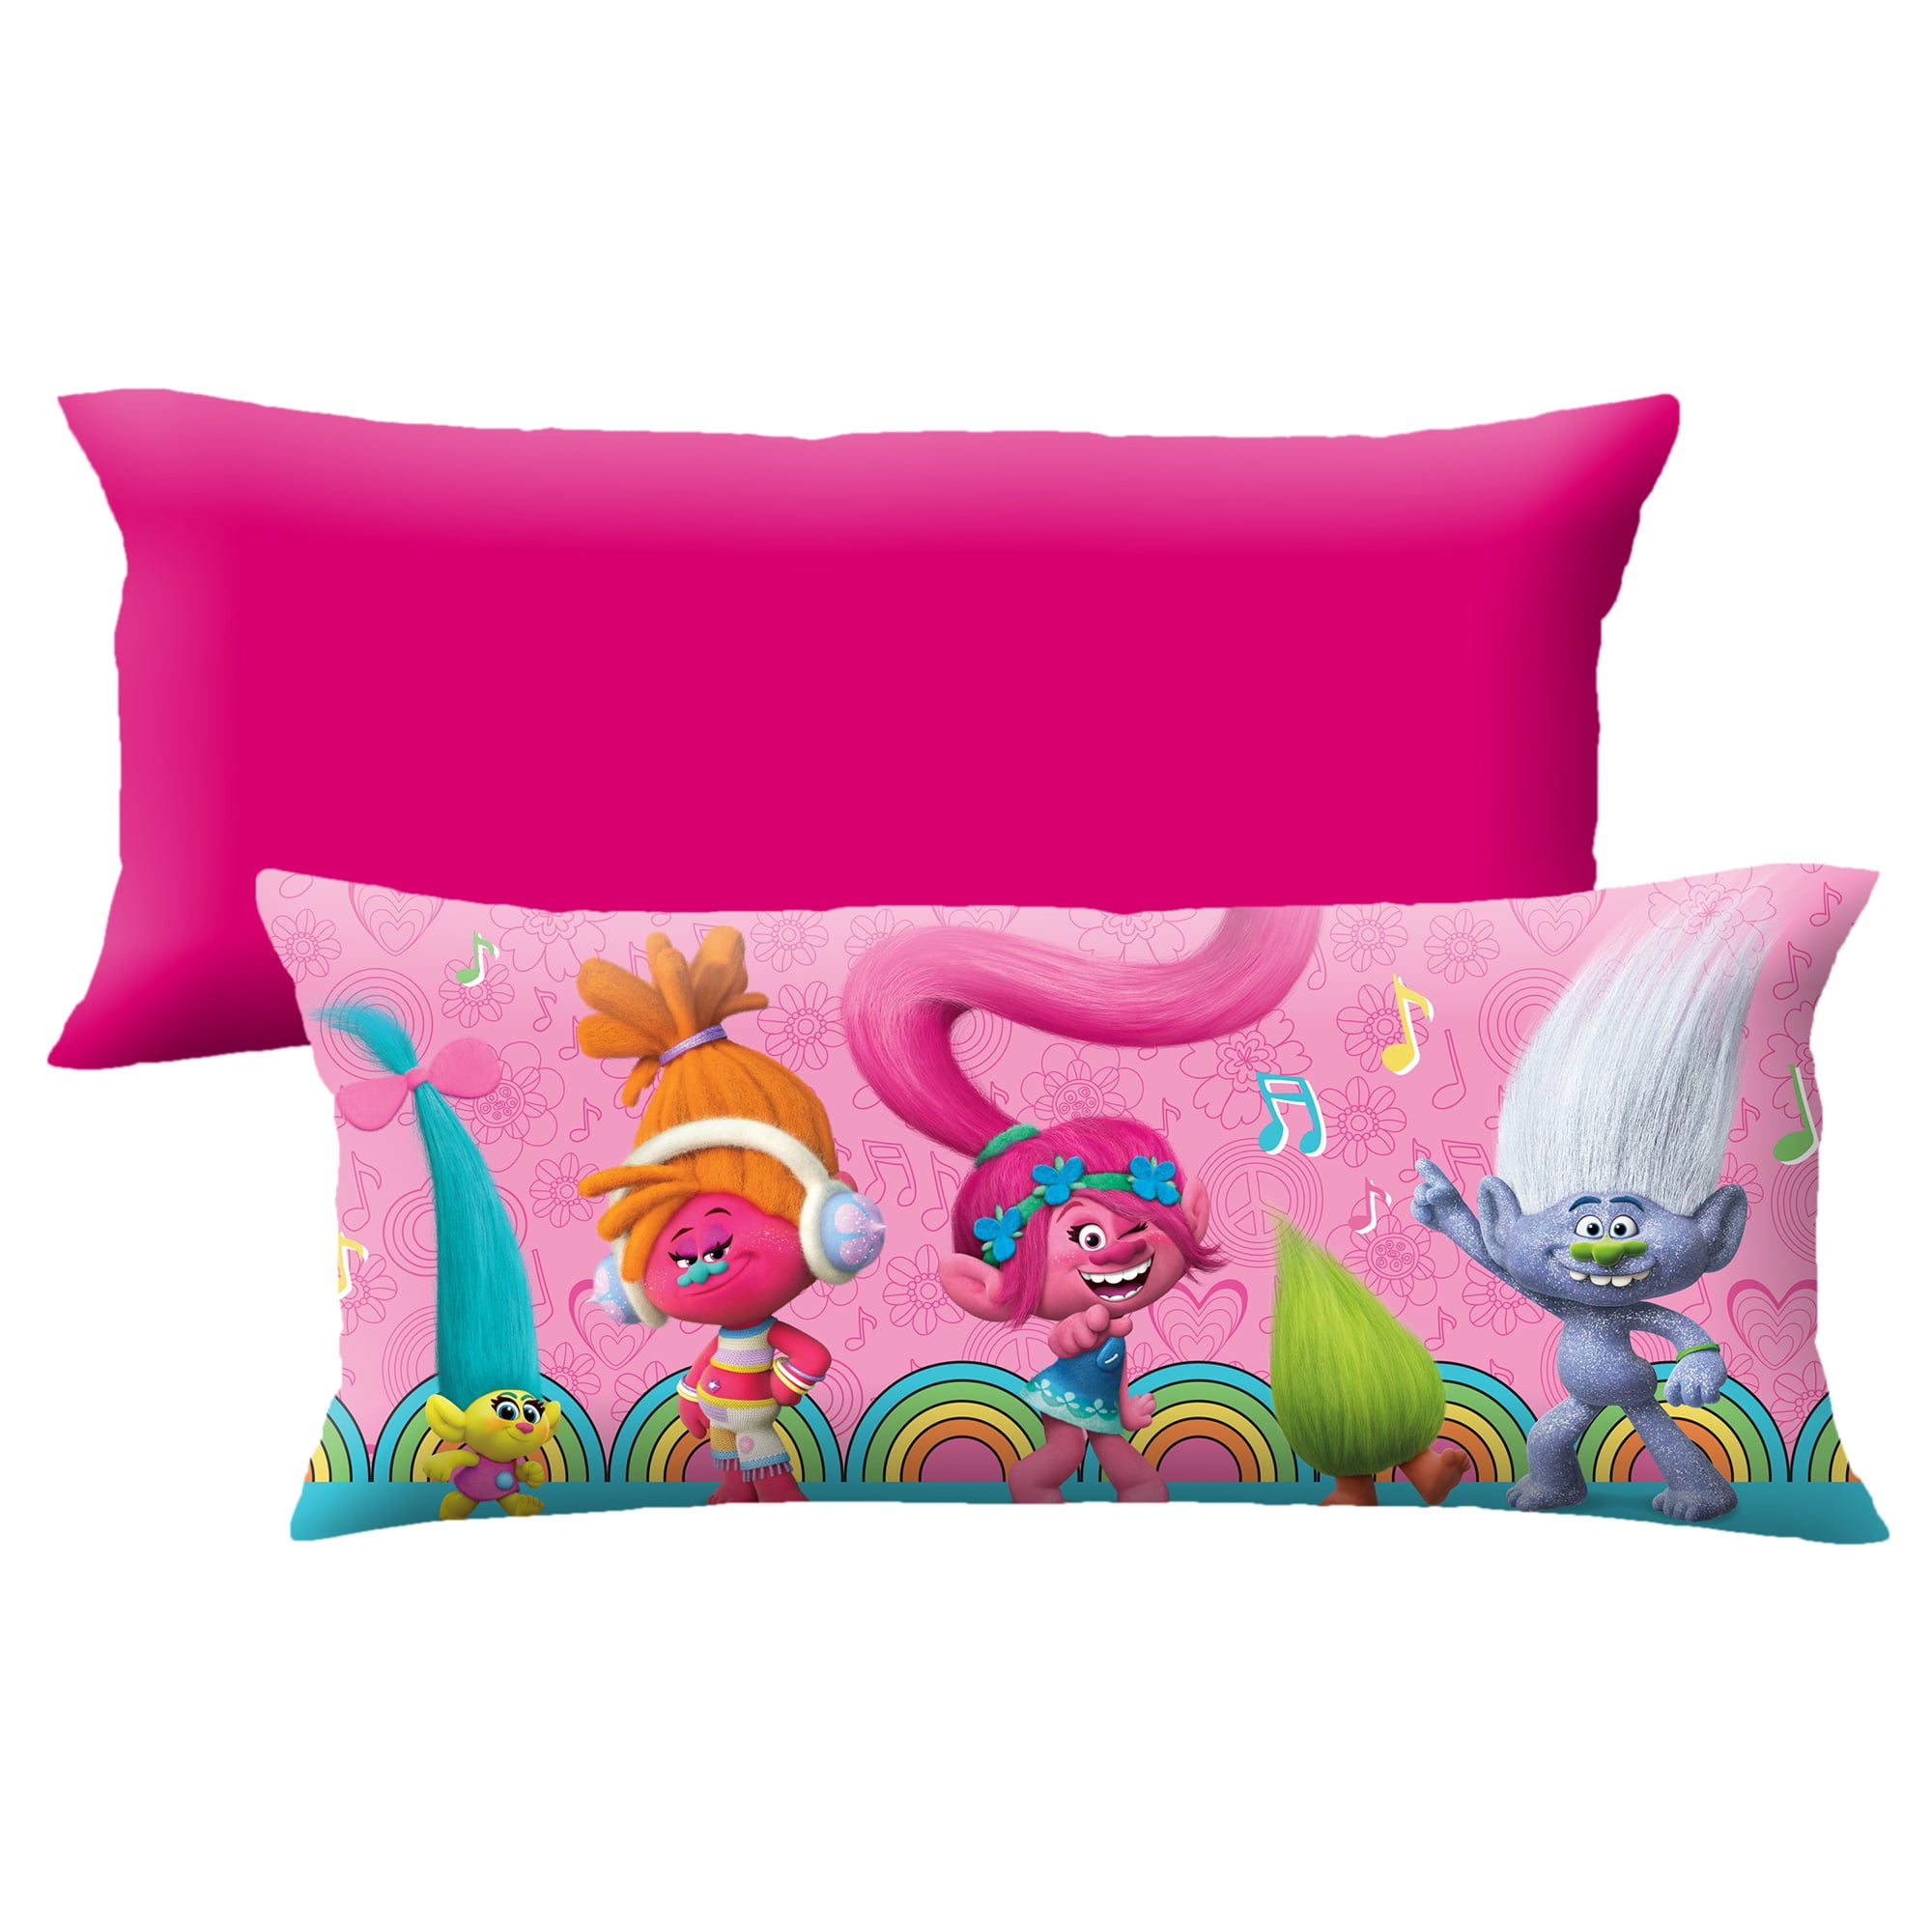 Trolls Pillow New Troll Movie Winter Special Pillow HANDMADE in the USA Pillow is approximately 10” X 11 